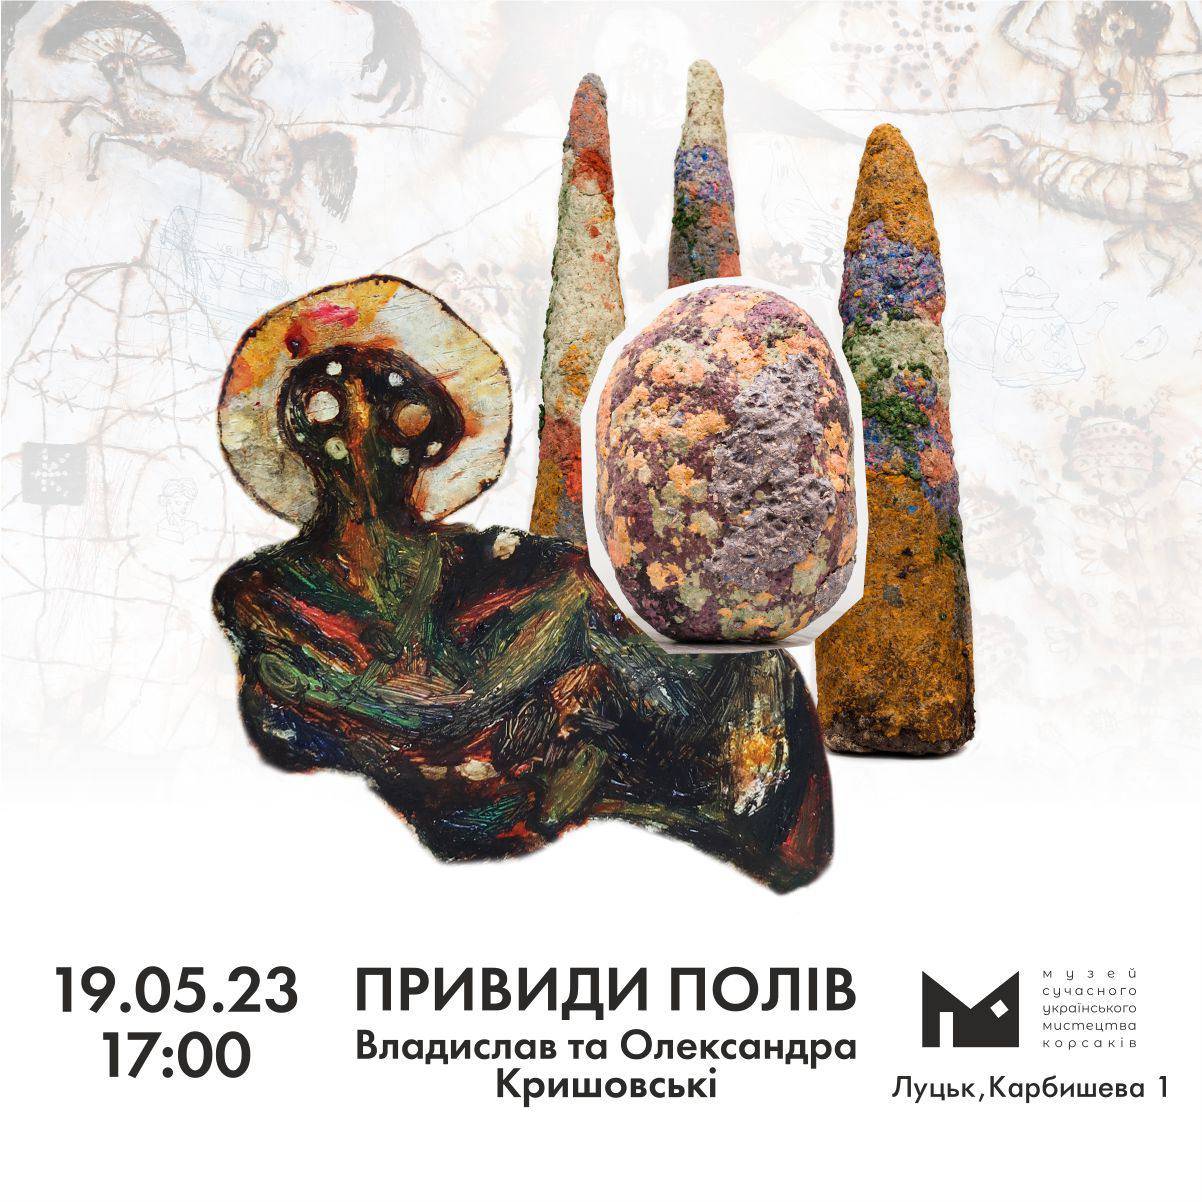 19.05. at 5:00 p.m., the Korsaks’ Museum will host the opening of Vladyslav and Oleksandra Kryshovsky’s project “Ghosts of the Fields”!